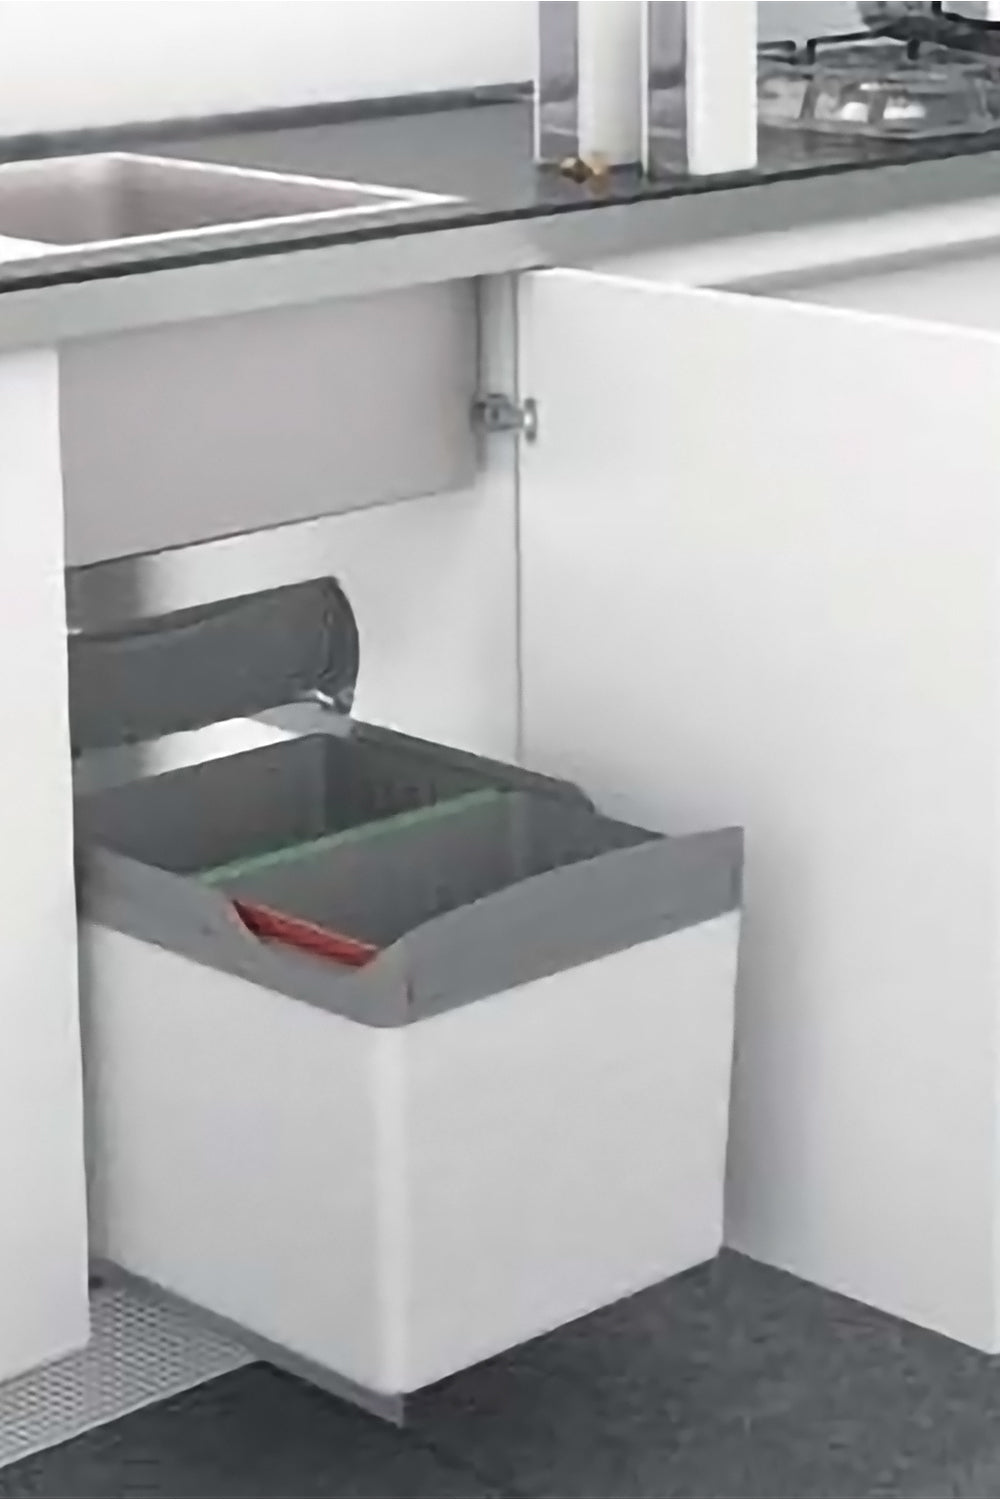 32L. Automatic Opening Pull-out Waste bin  連門自動開啓廚房垃圾桶 垃圾分類 | Waste Separation | Eco Recycling  | Kitchen Trash can, Rubbish Bin | Made in Italy |